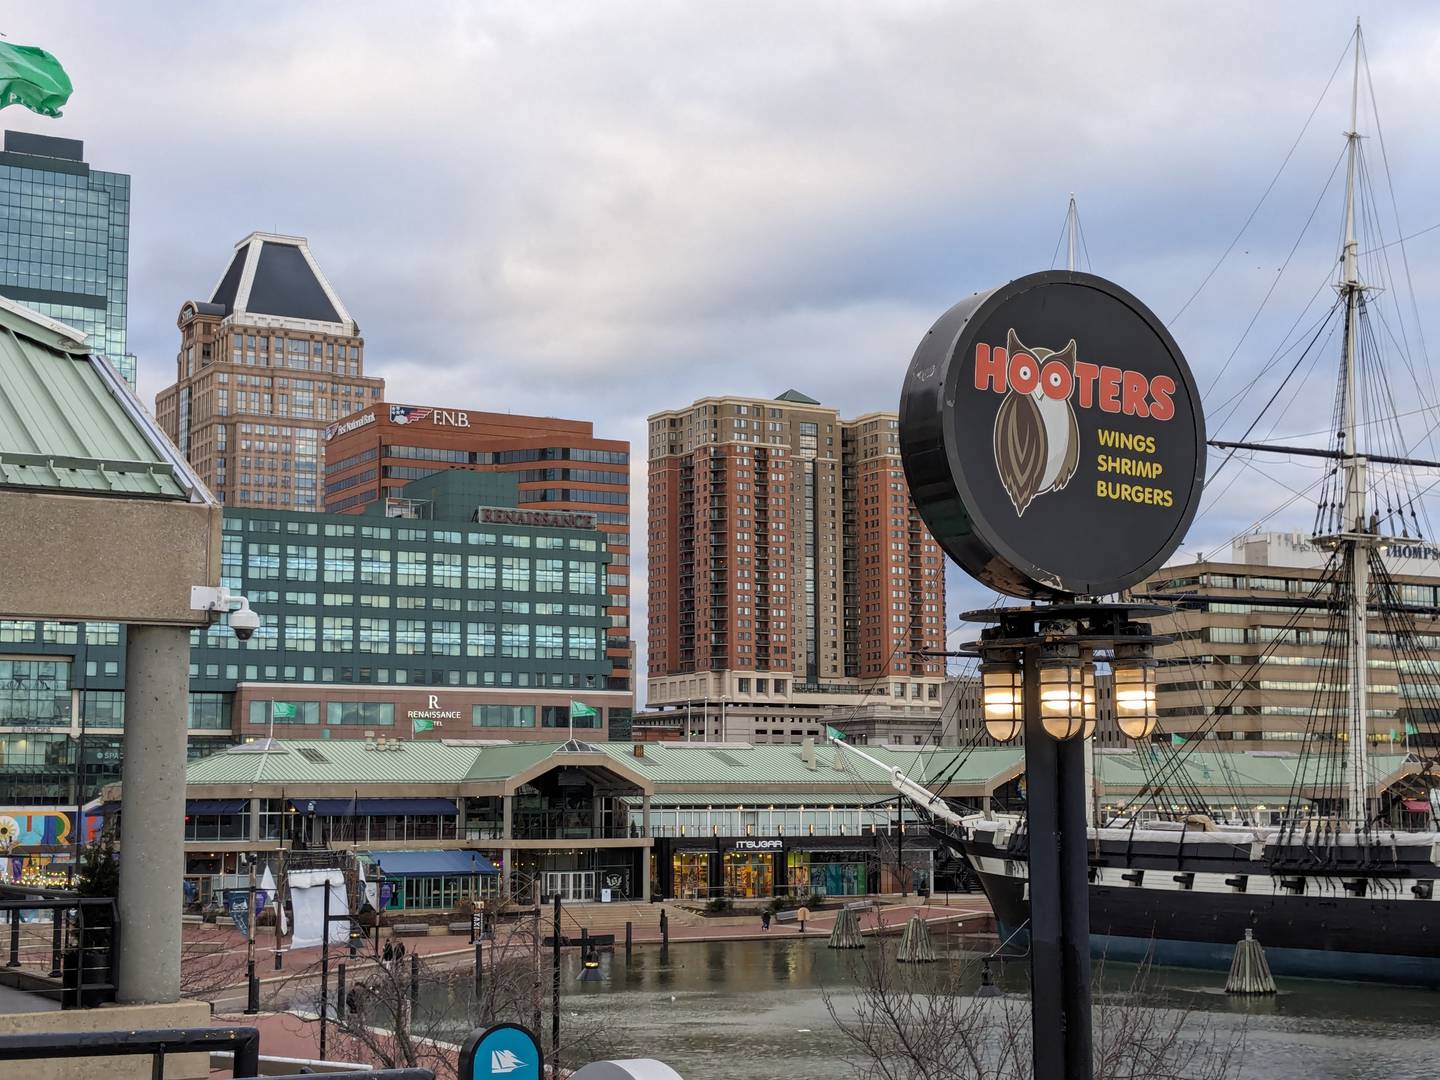 This is a photo of Hooters, which originally came to Harborplace in 1990, and is suing its landlord over deteriorating conditions at the mall-like pavilions.